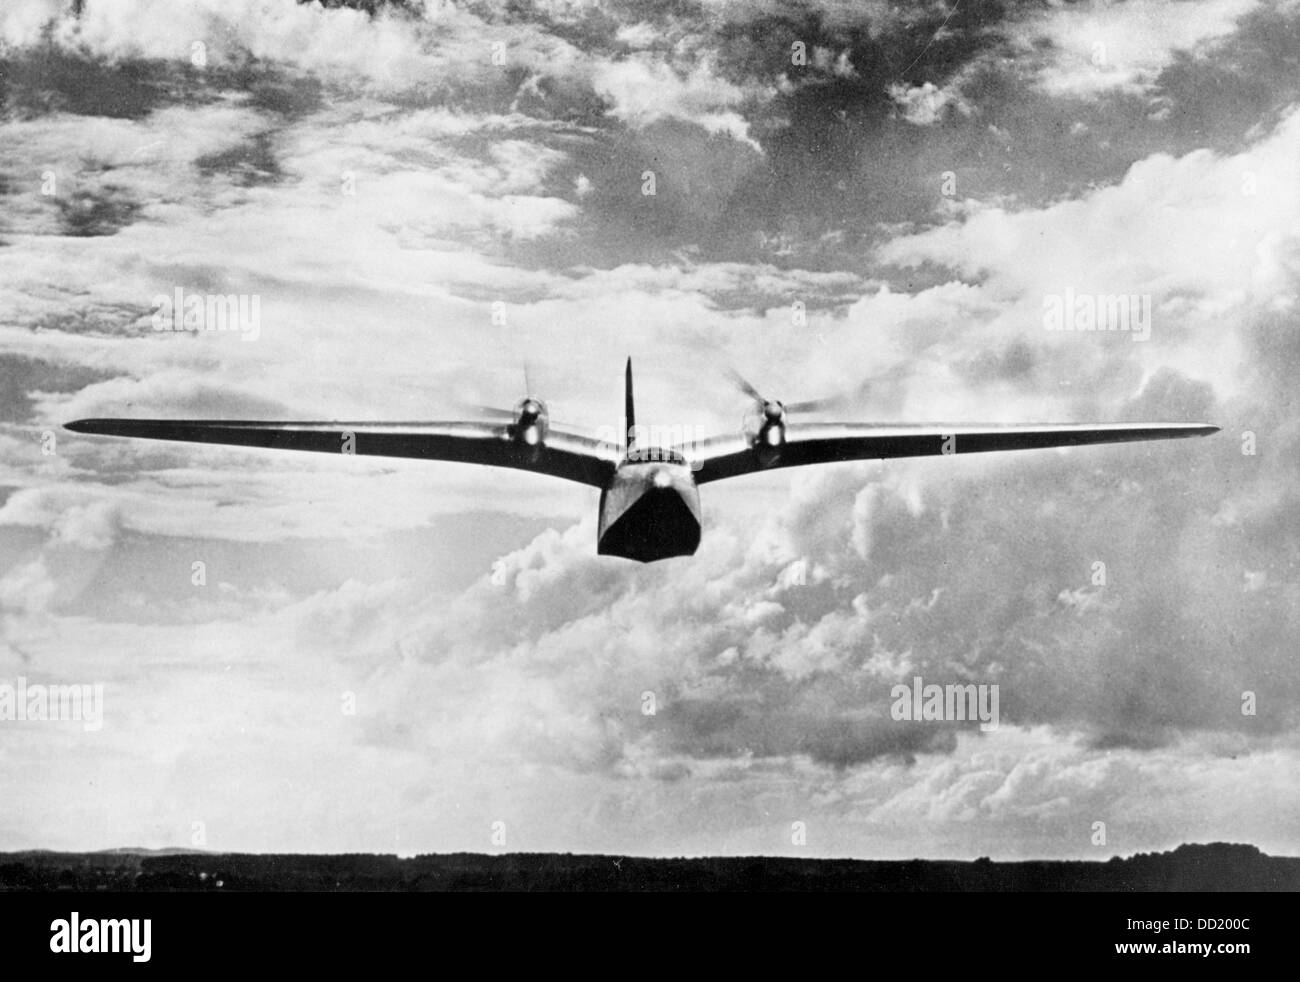 A flying boat of the type Do 26 produced by Dornier Flugzeugwerke (Dornier Aircraft Manufacturer) during a presentation at the Müggelsee in Berlin on 1 September 1938. The Dornier Do 26 was built starting in 1937 and was used for transatlantic flights of the German Wehrmacht from 1938 to 1944. The Nazi Propaganda! on the back of the picture is dated 1 September 1938: 'Presentation of the transatlantic flying boat 'Do 26' at the Müggelsee near Berlin on Thursday, 1 September. - The 'Do 26' in flight. The four-engine flying boat was constructed for non-stop flights over the Atlantic Ocean. The m Stock Photo